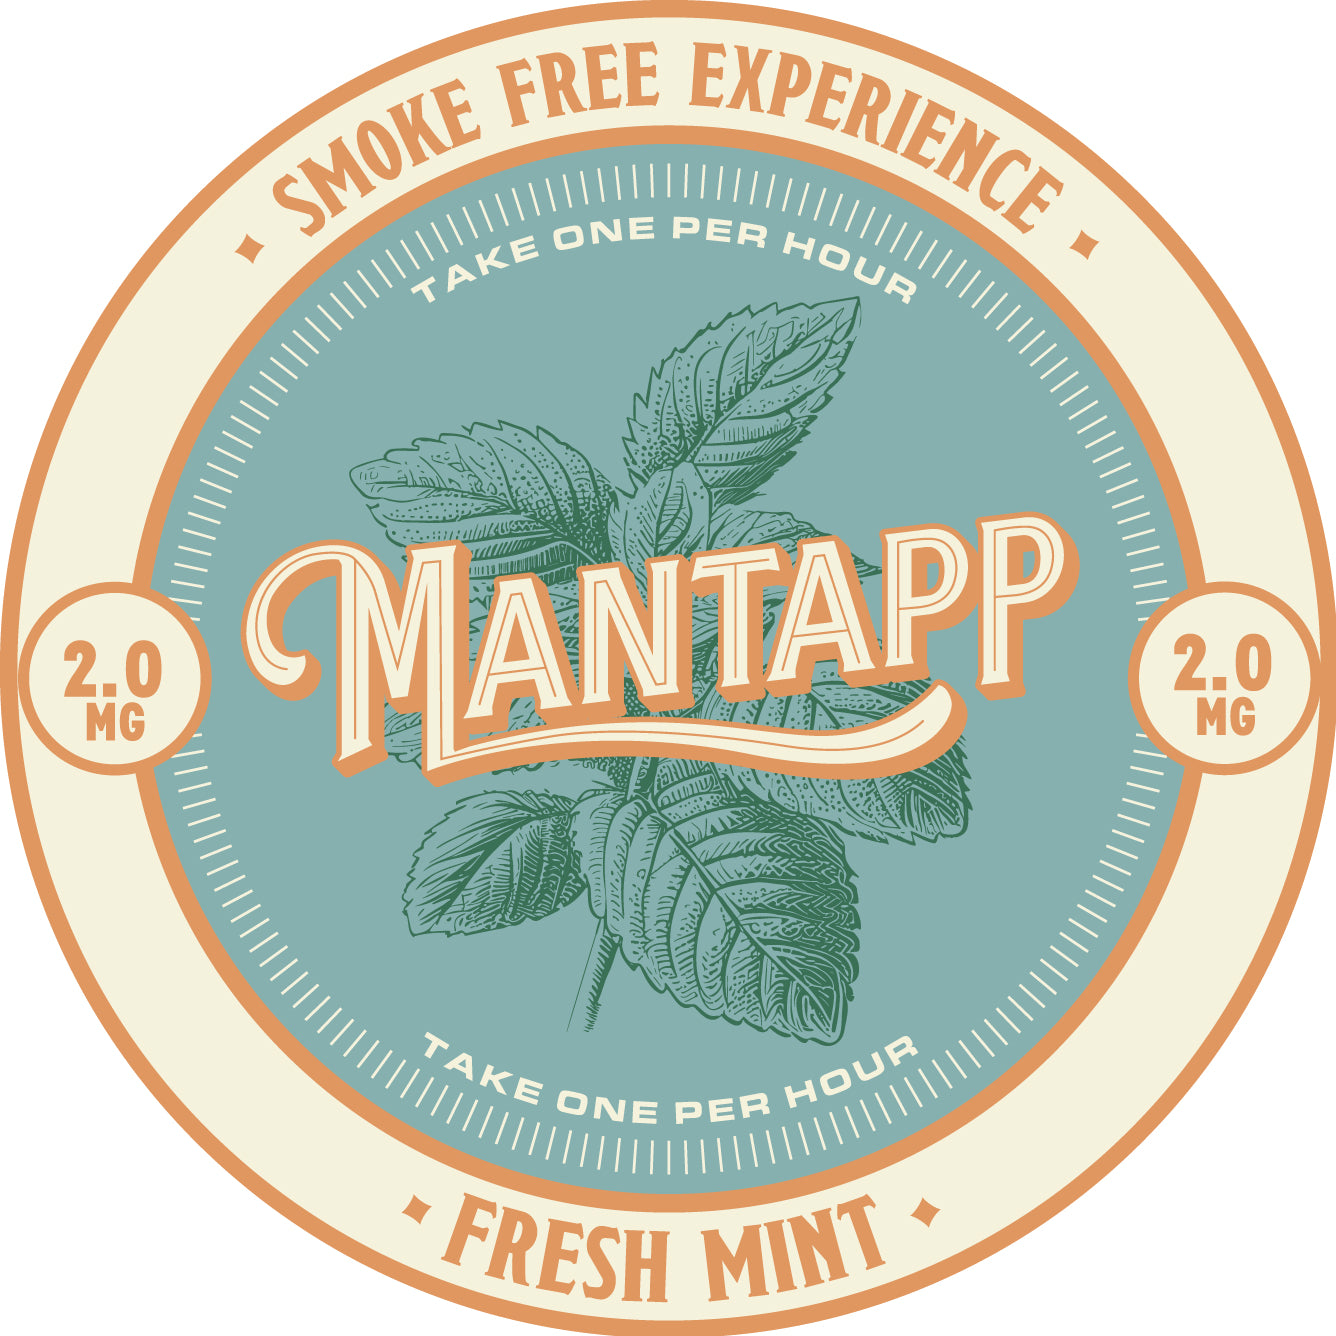 Mantapp Nicotine Pouch - Fresh Mint 2mg    (Single Pouch)